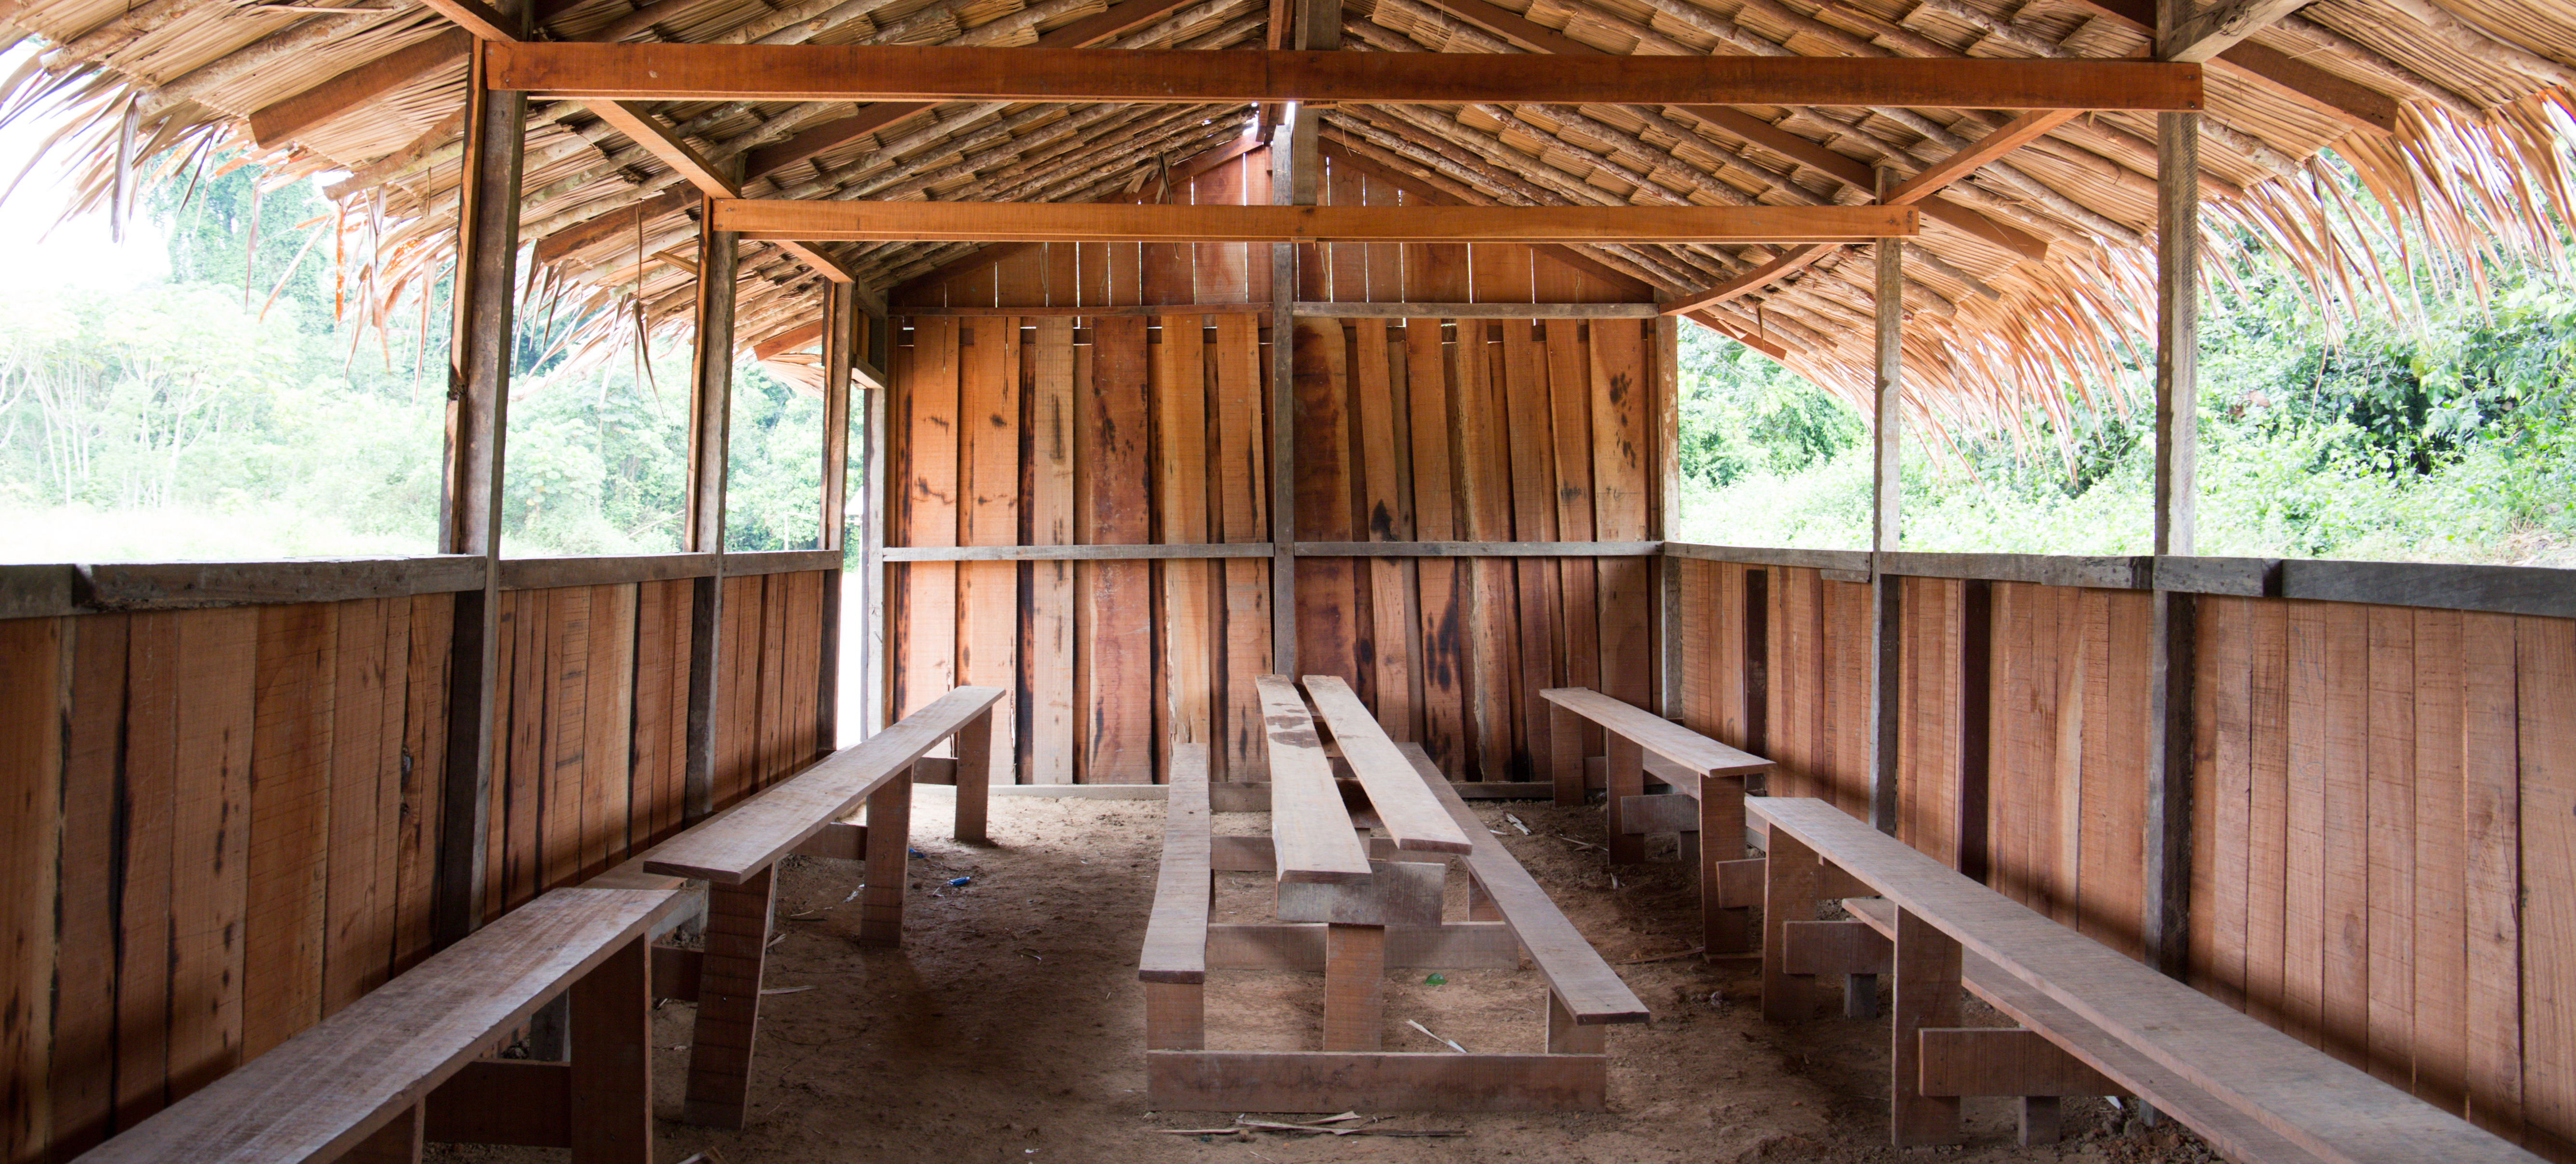 school lunch area in wooden shelter area congo